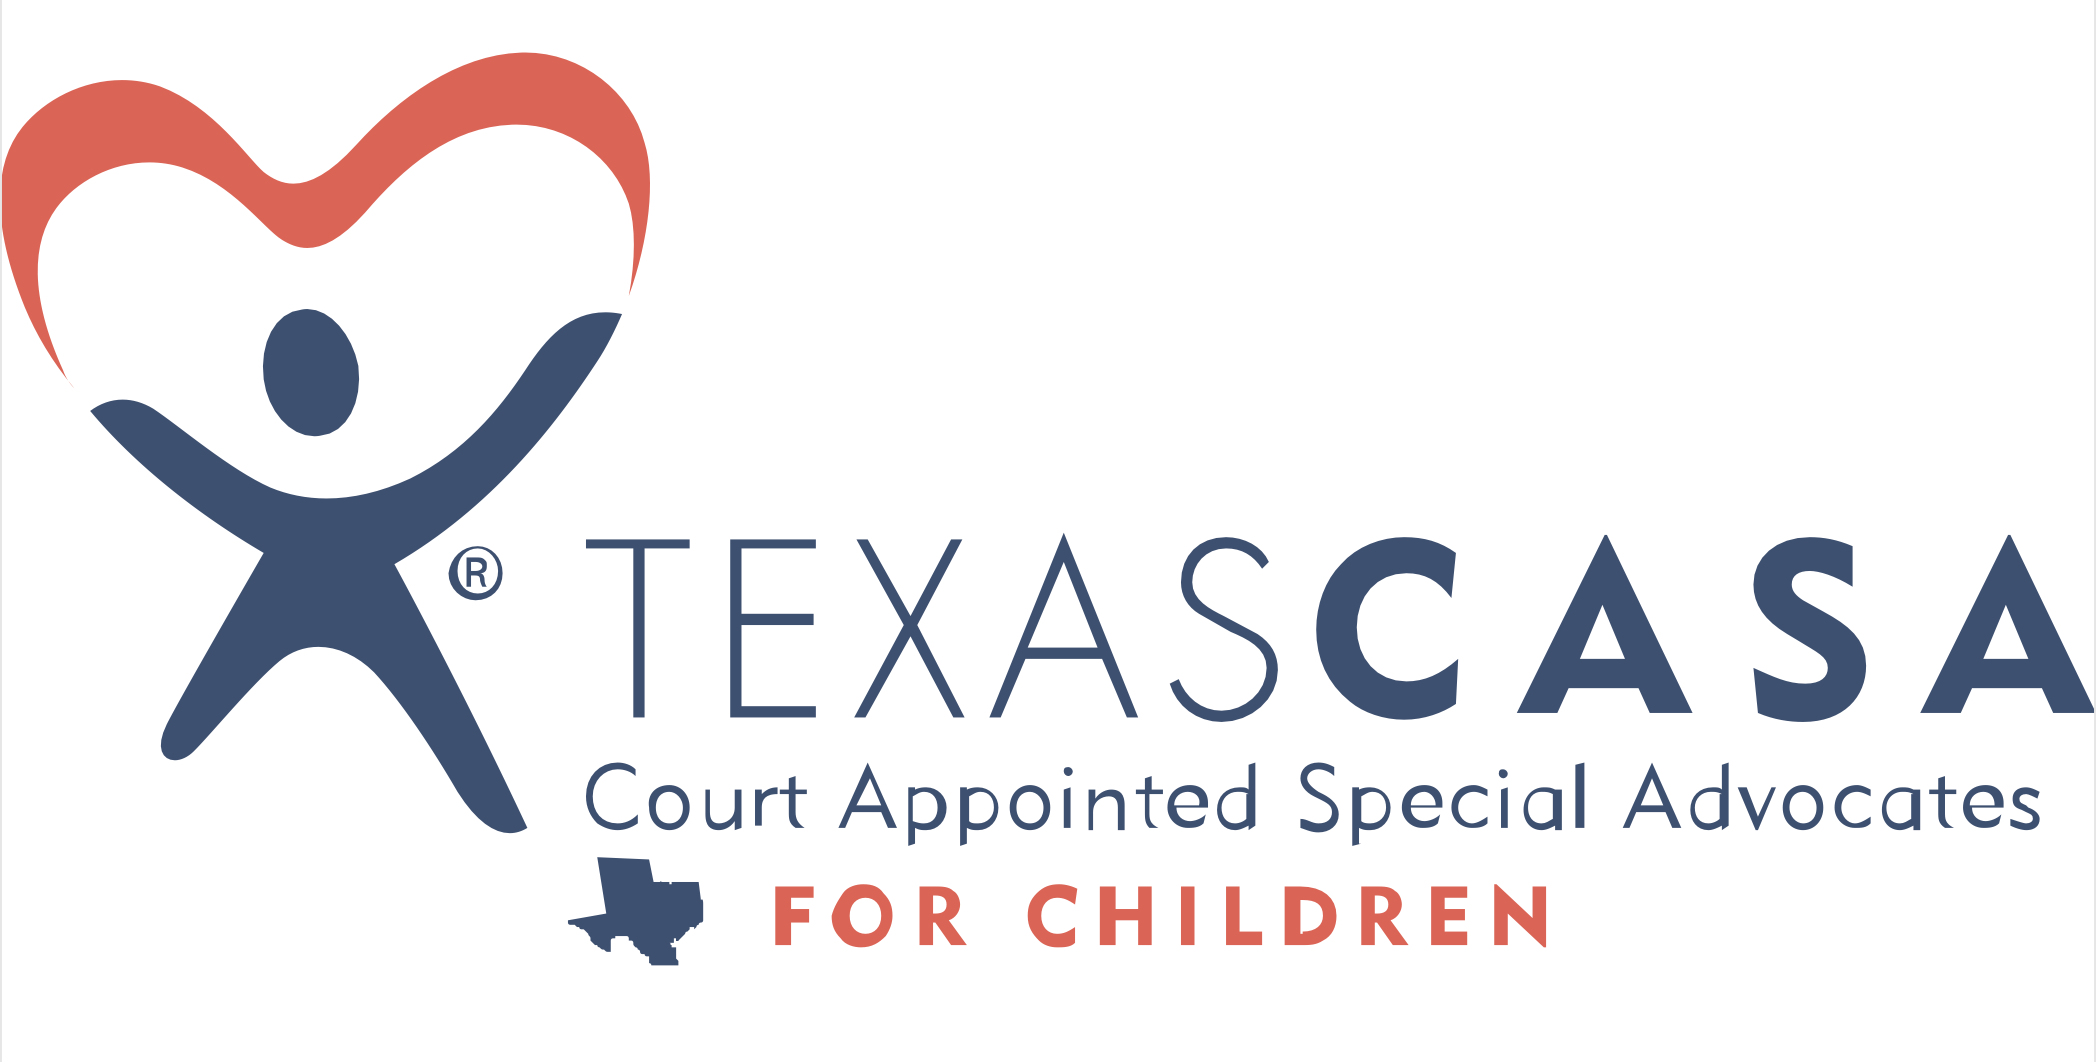 Texas Casa Court Appointed Special Advocates For Children Cheyenne Construction Group Sugar Land TX